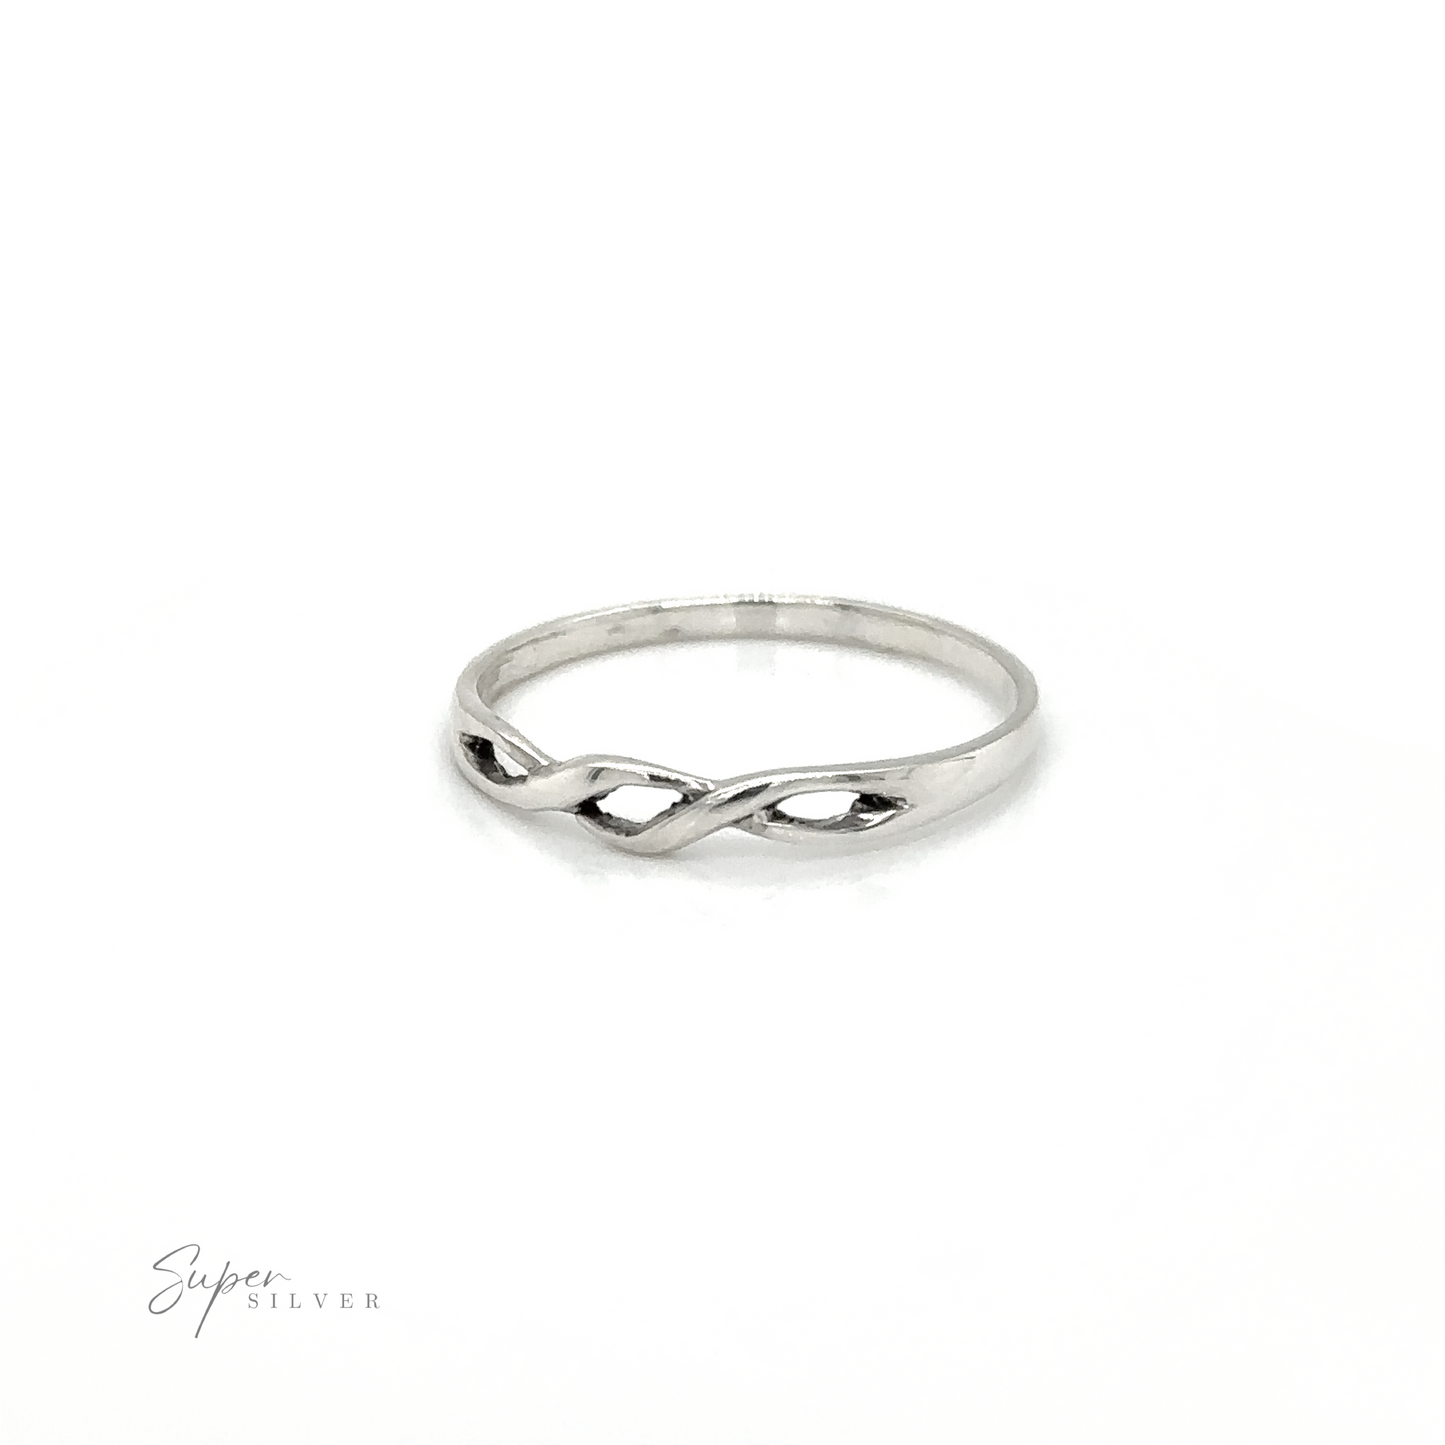 A delicate Dainty Open Twist Band, perfect for minimalist fashionistas.